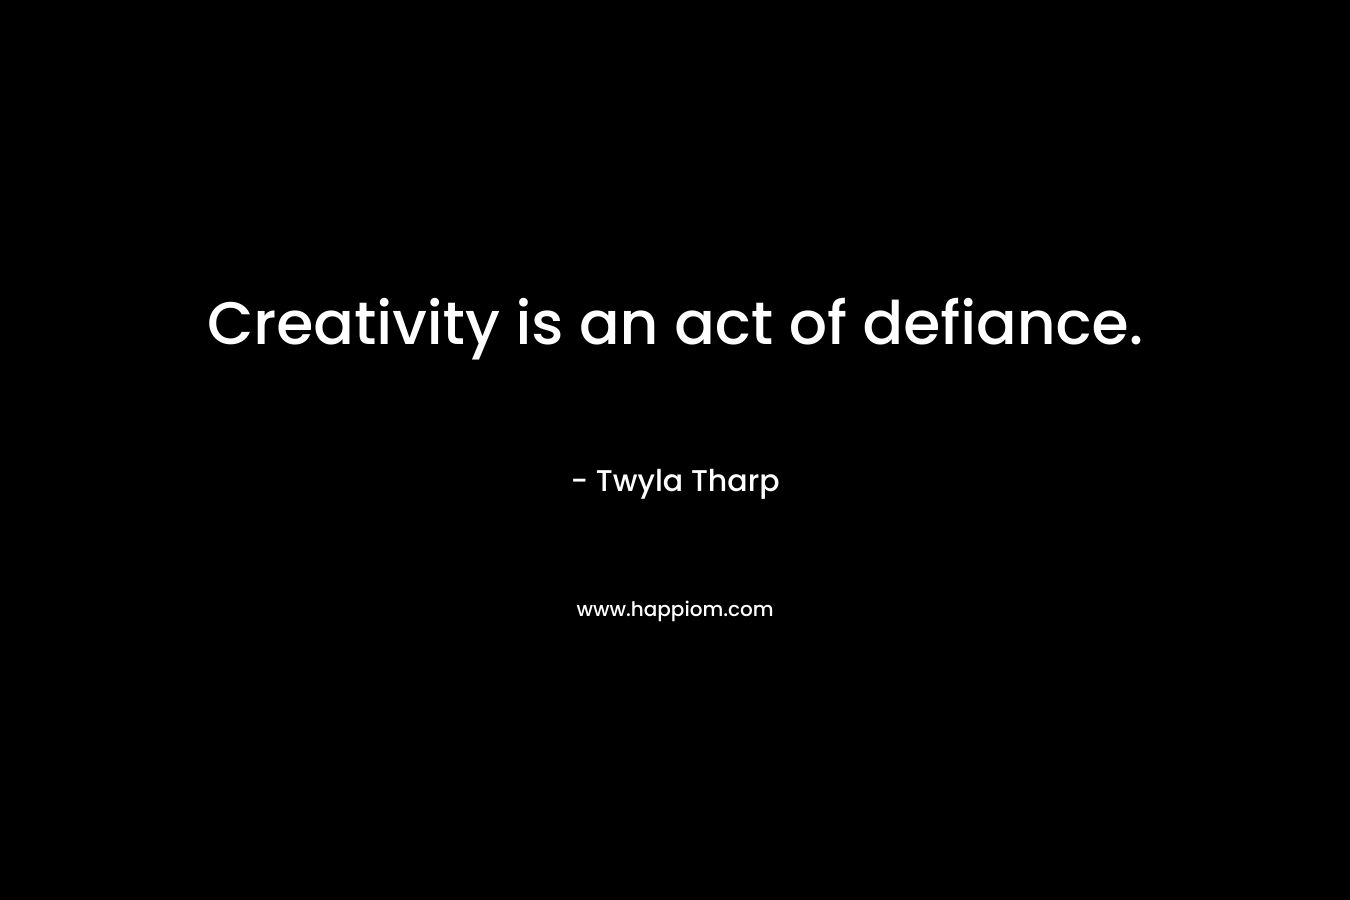 Creativity is an act of defiance.